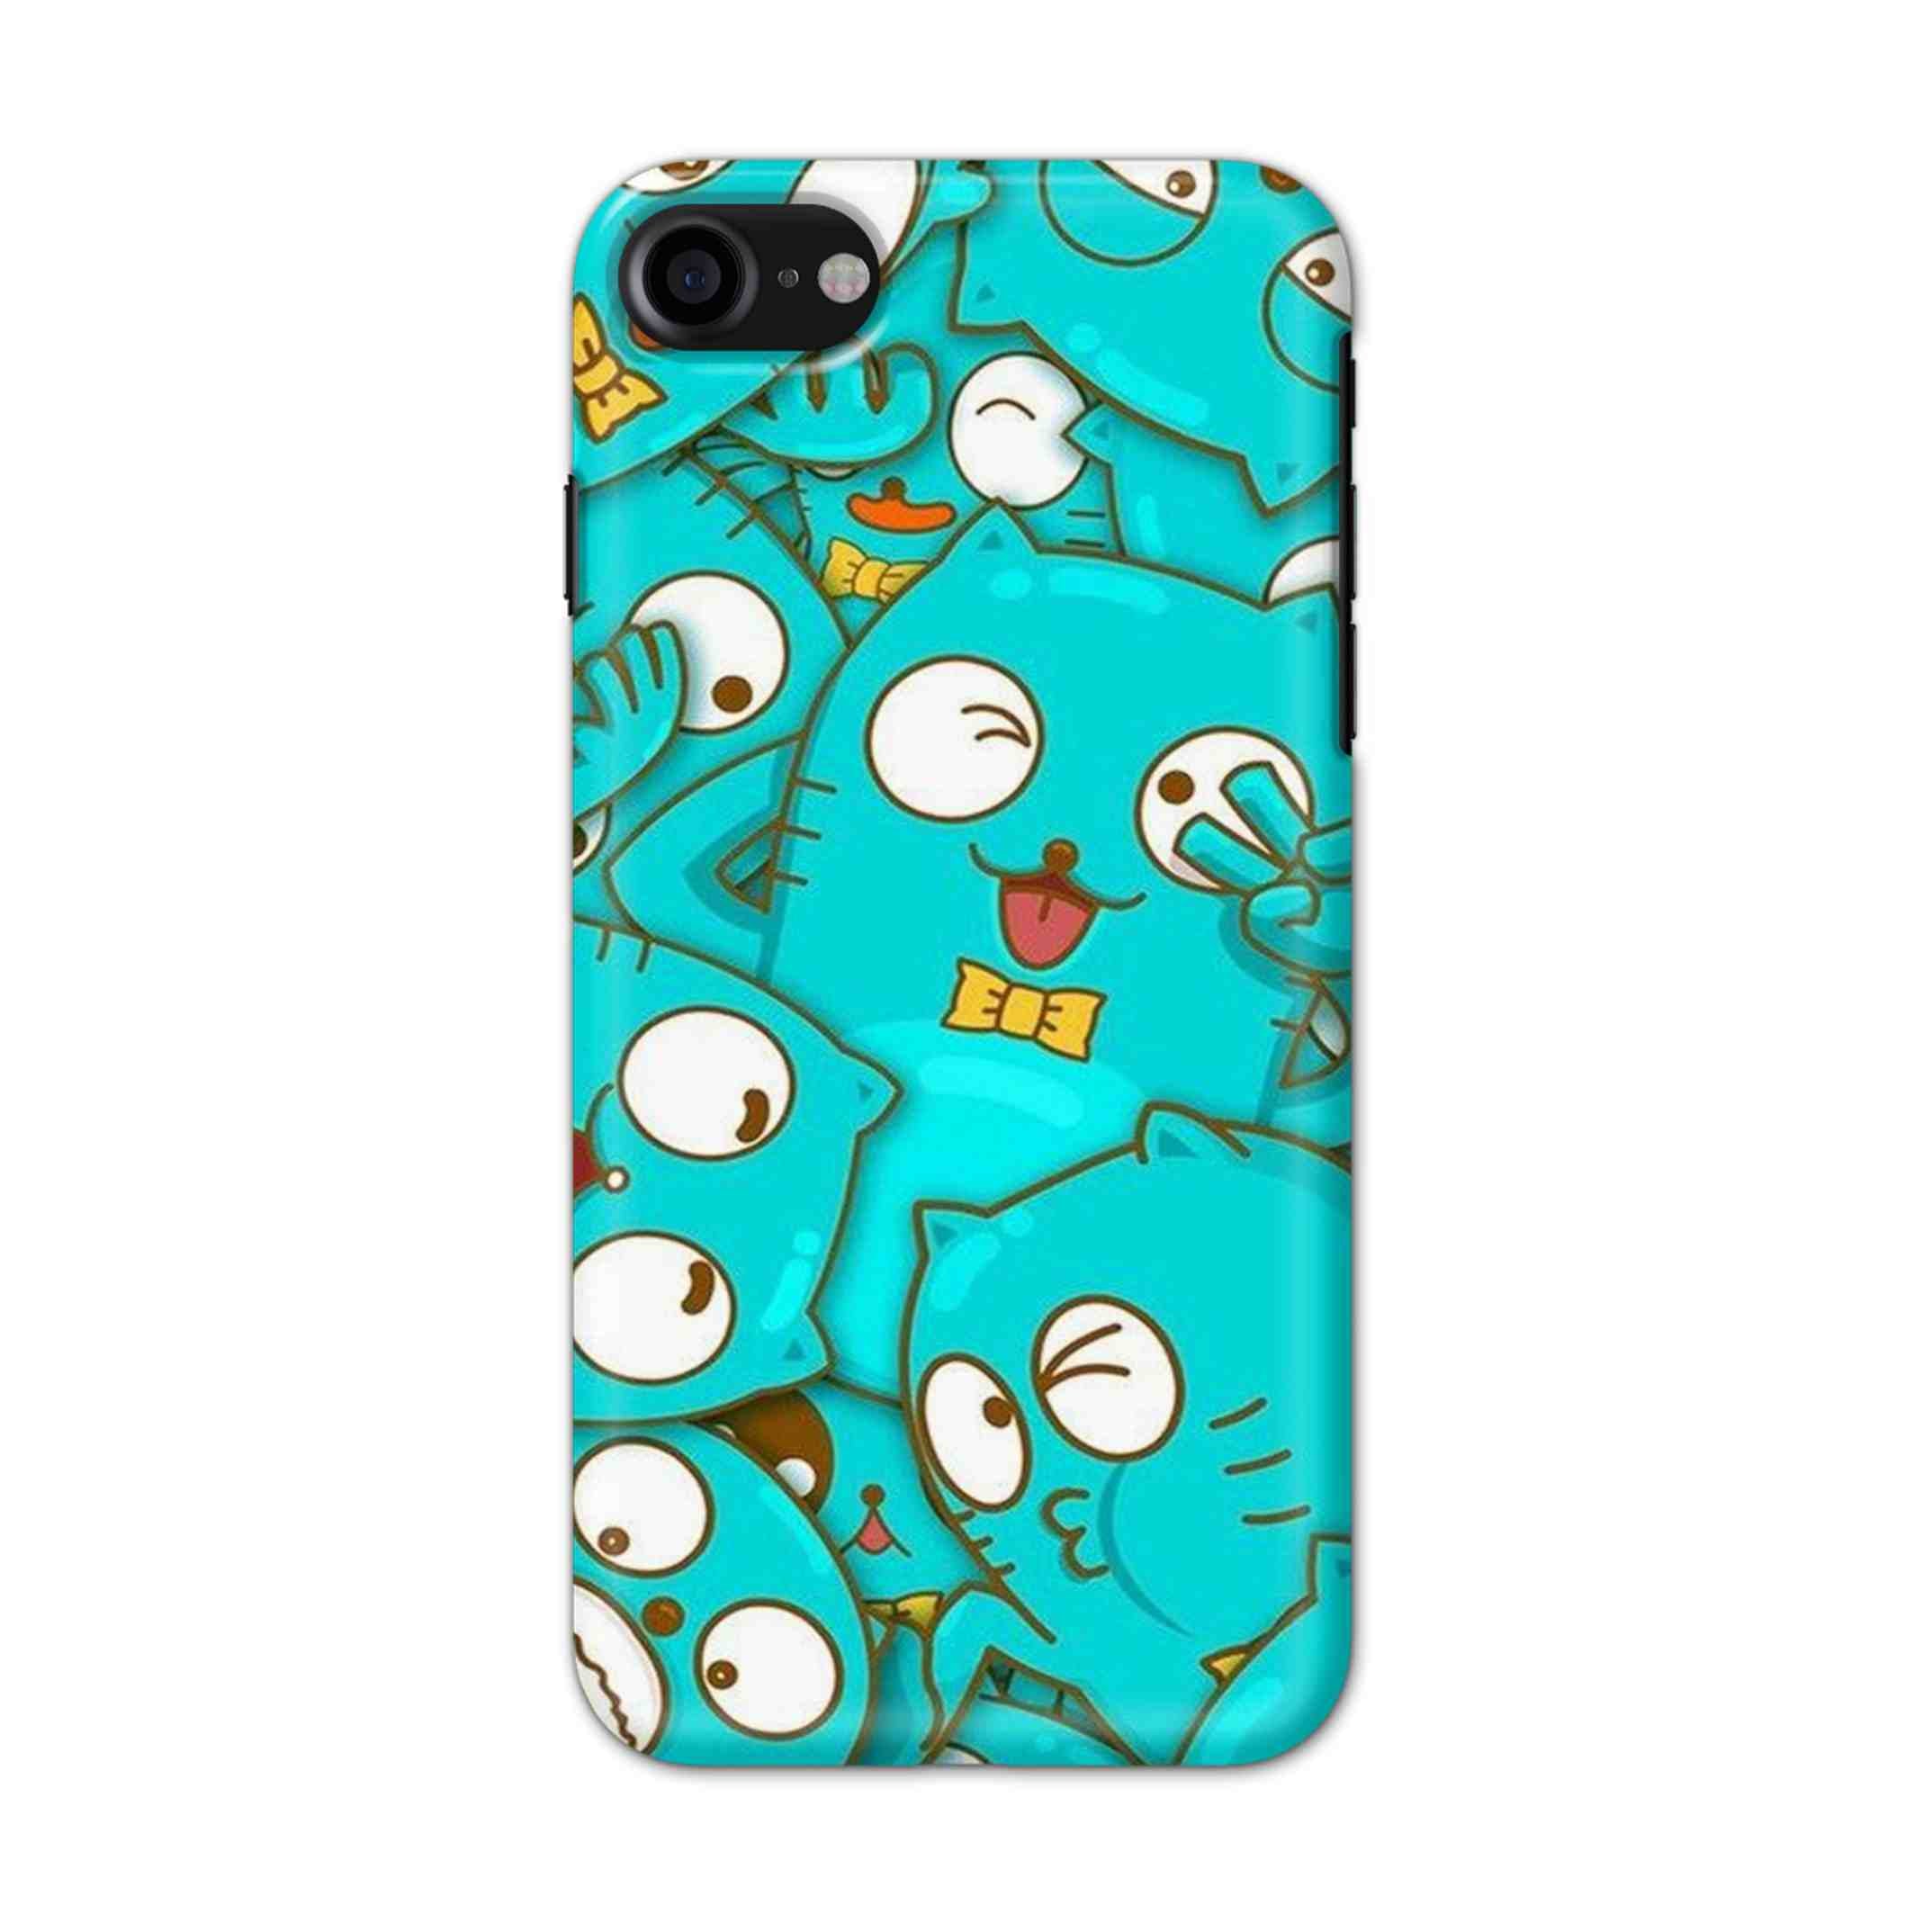 Buy Cat Hard Back Mobile Phone Case/Cover For iPhone 7 / 8 Online